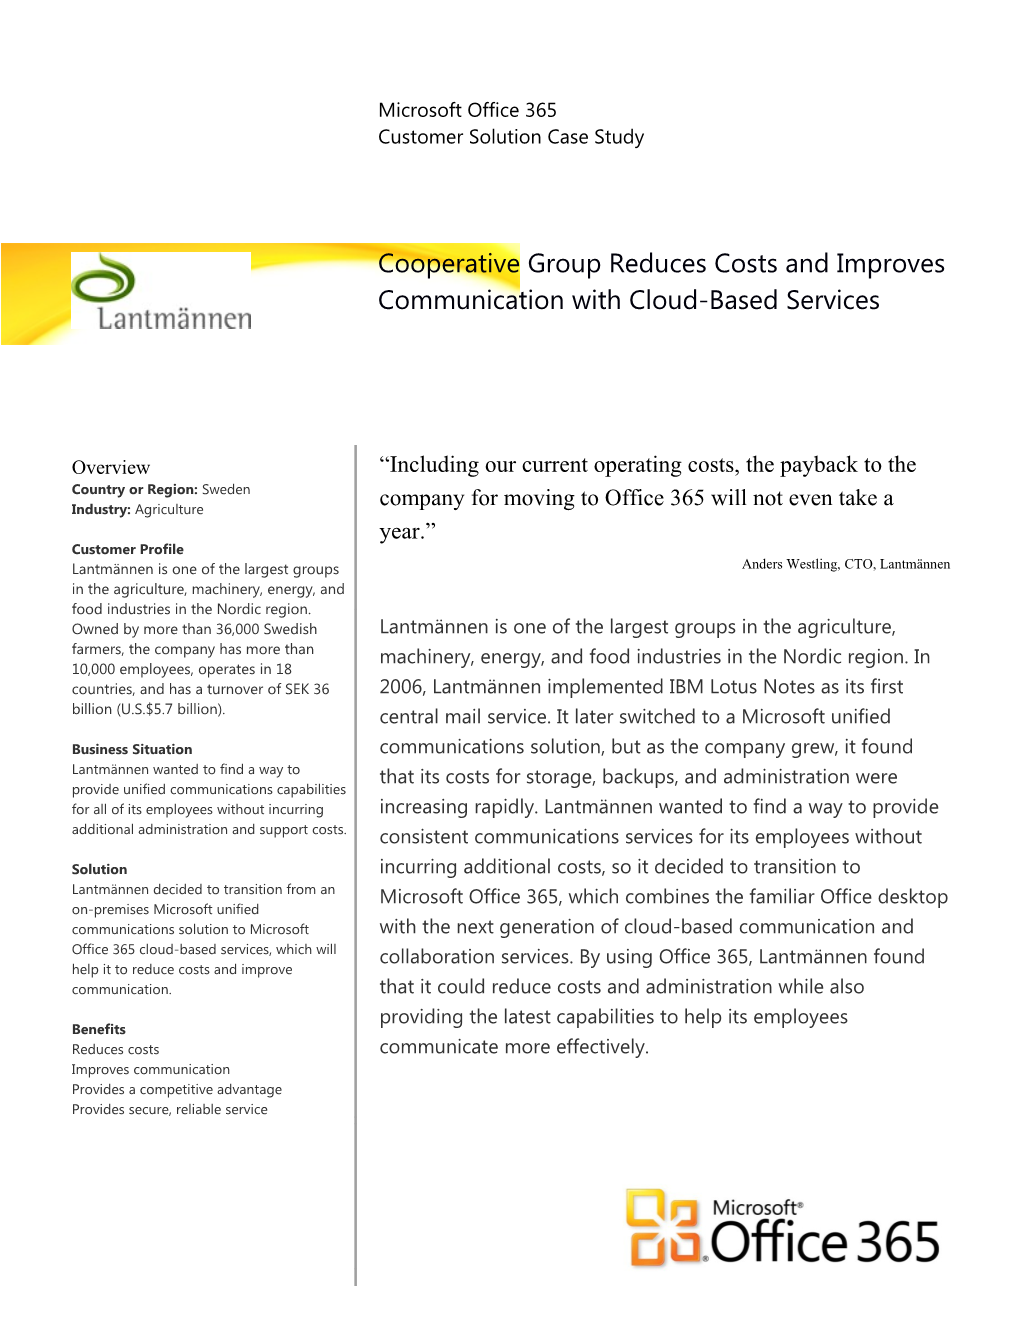 Cooperative Group Reduces Costs and Improves Communication with Cloud-Based Services